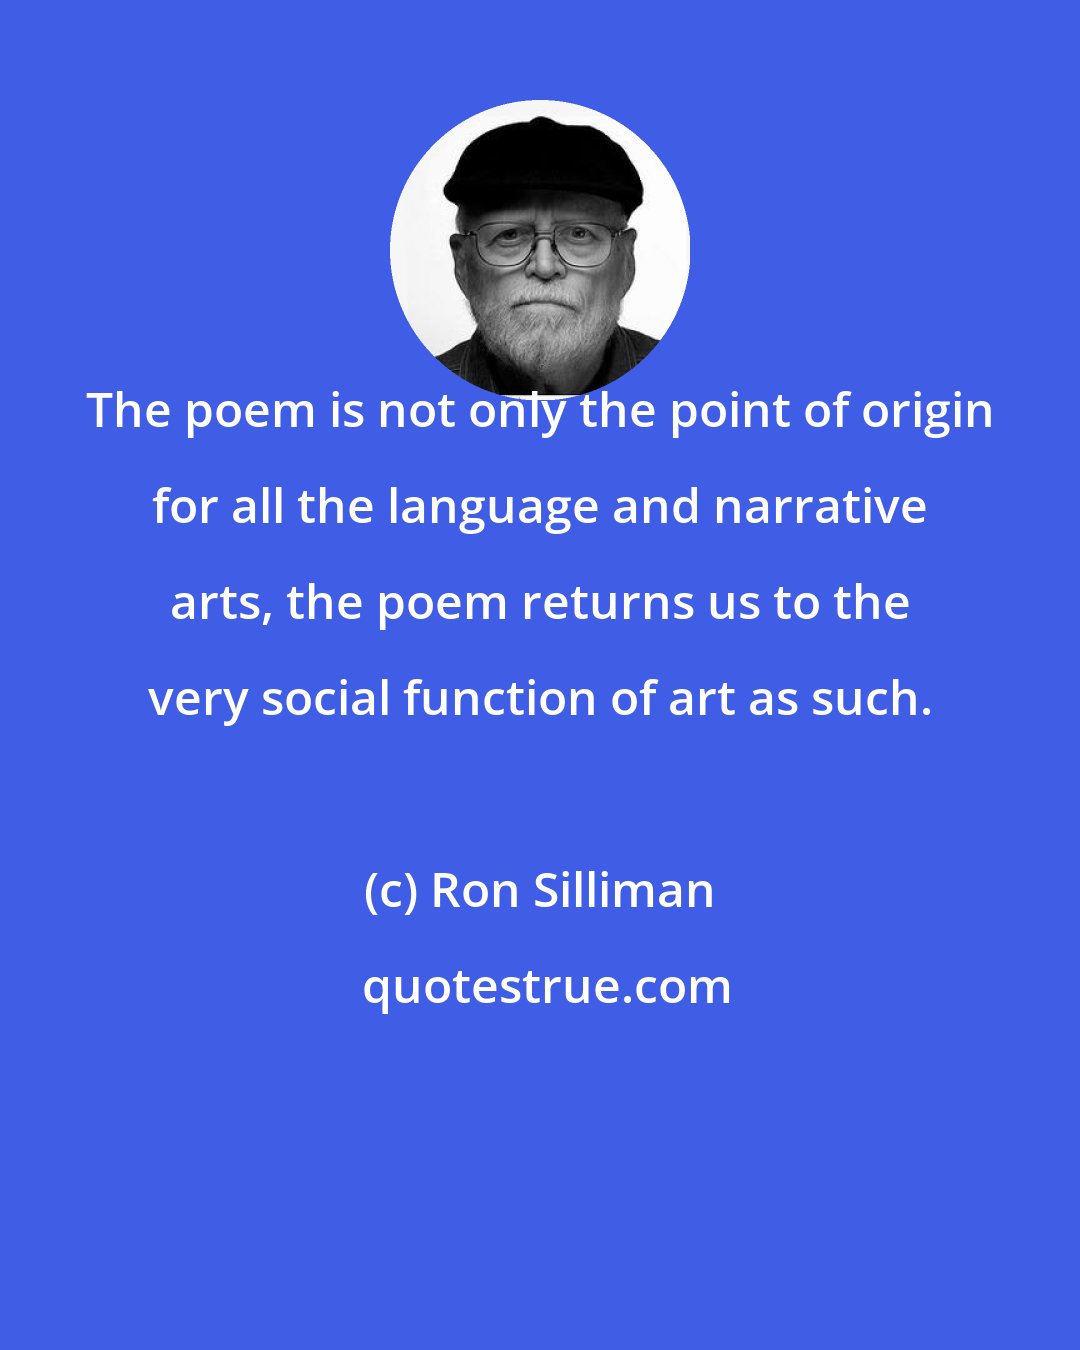 Ron Silliman: The poem is not only the point of origin for all the language and narrative arts, the poem returns us to the very social function of art as such.